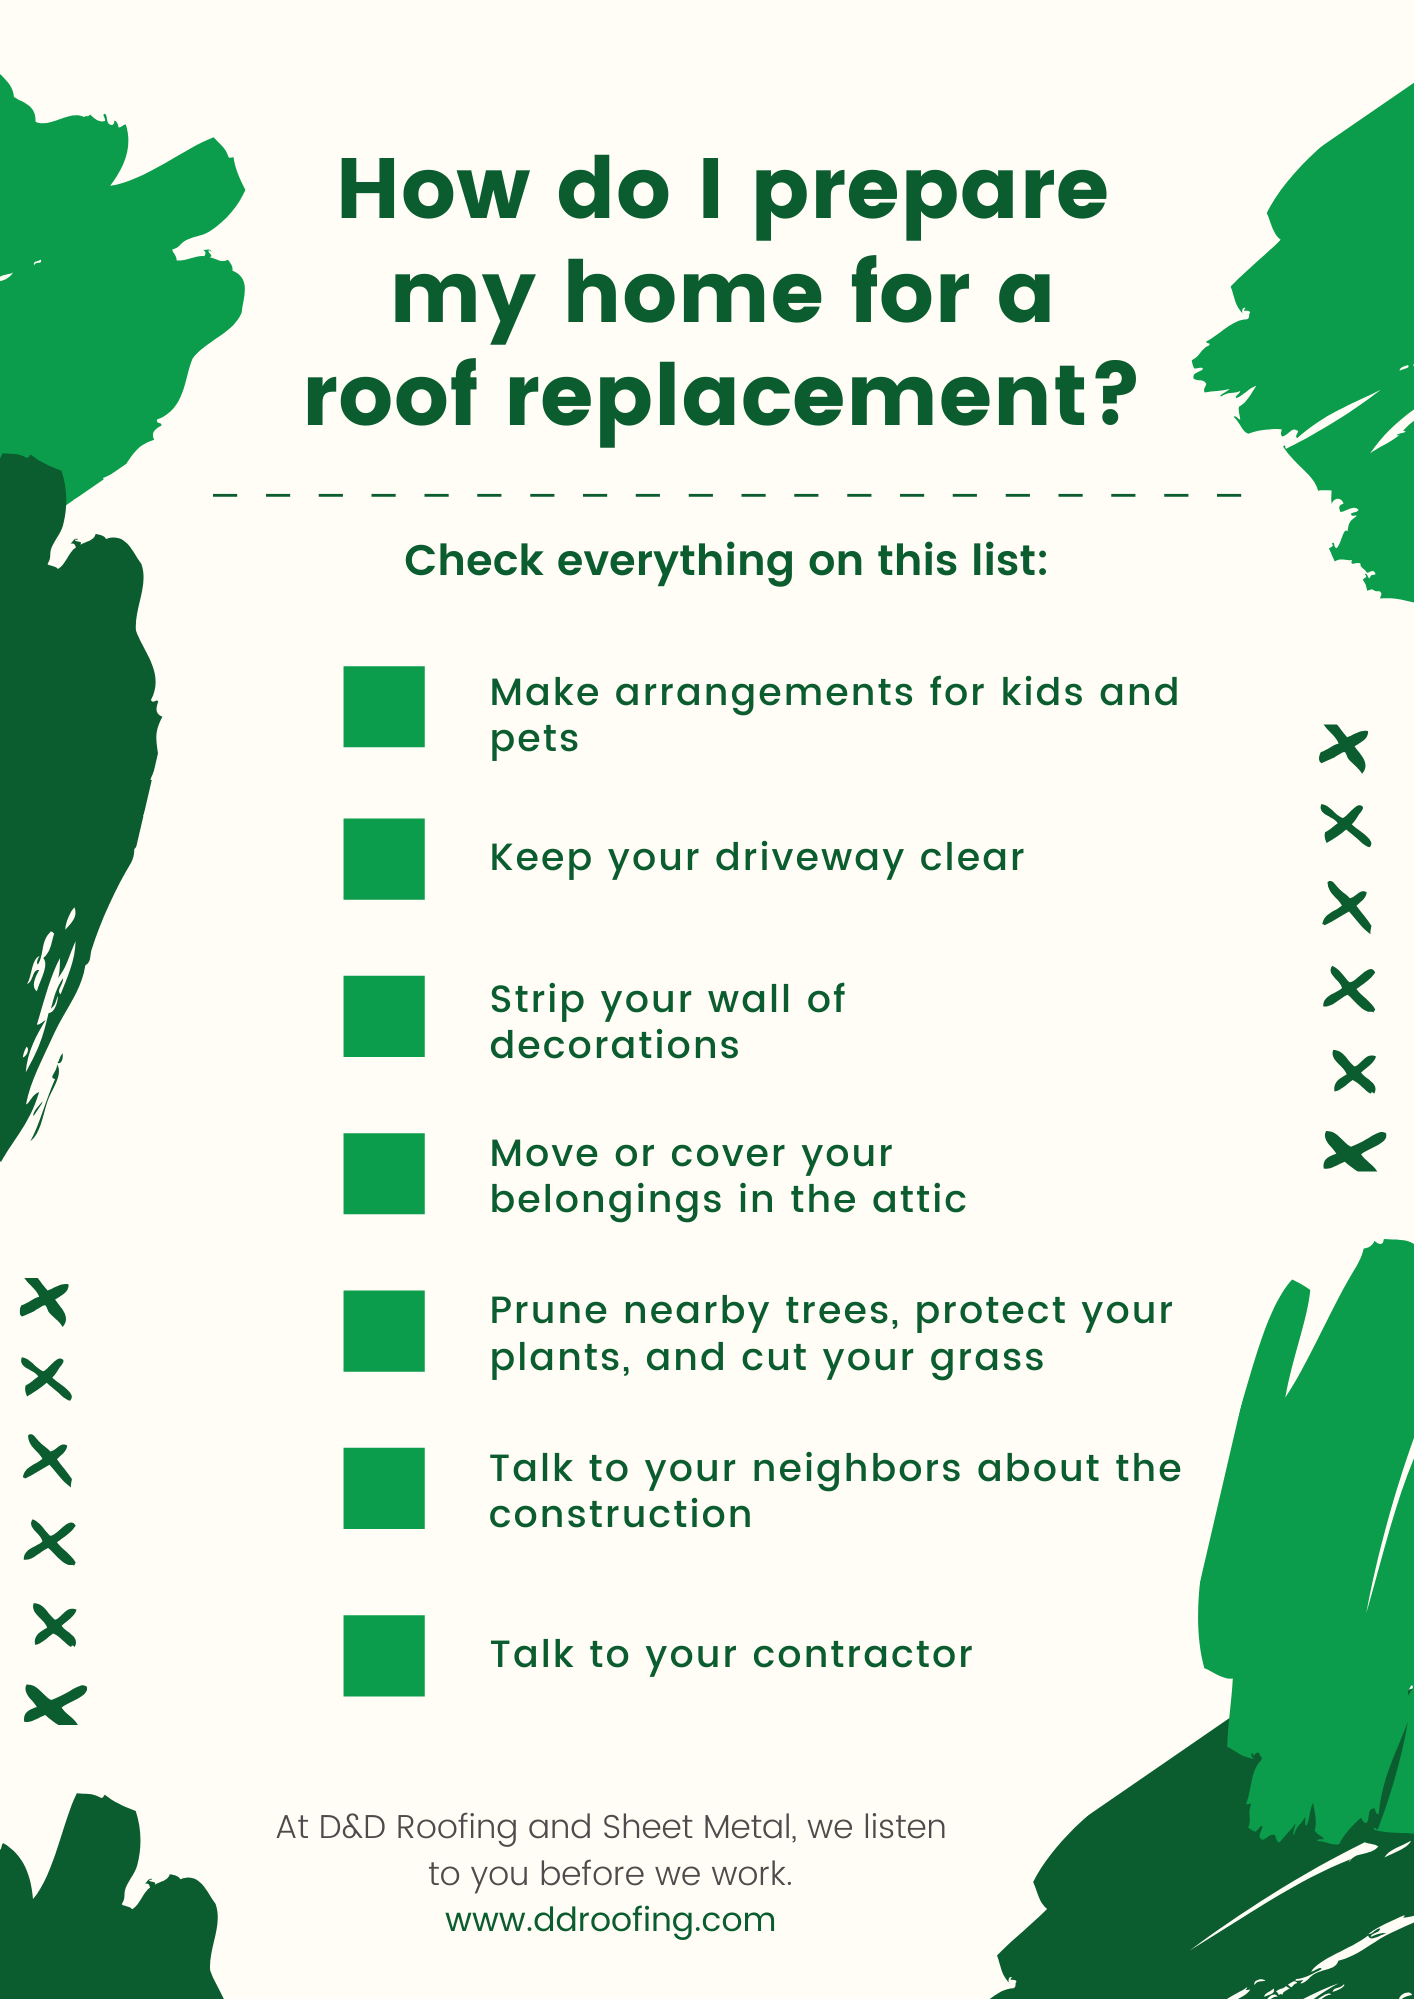 Roof replacement checklist